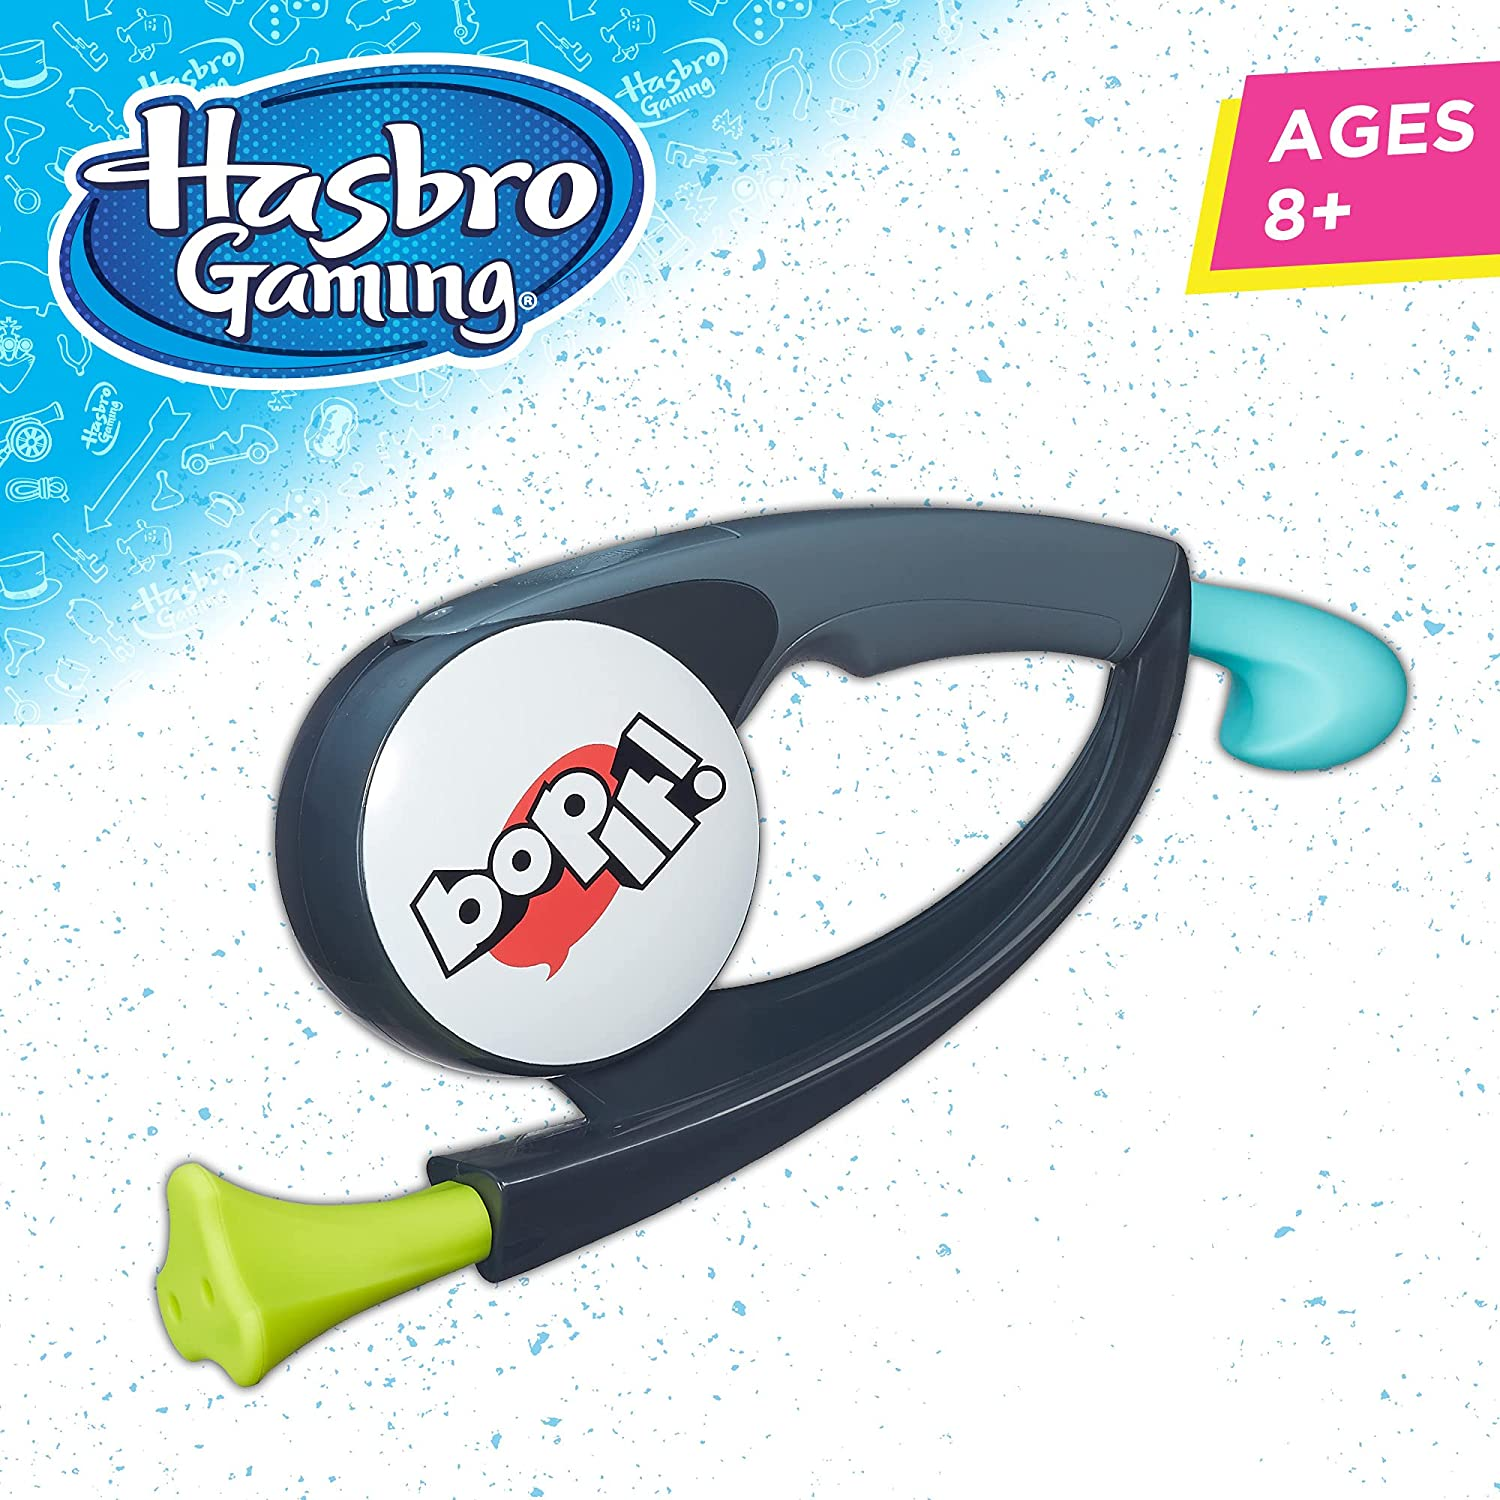 Game for sale online Hasbro B7428 Bop It 